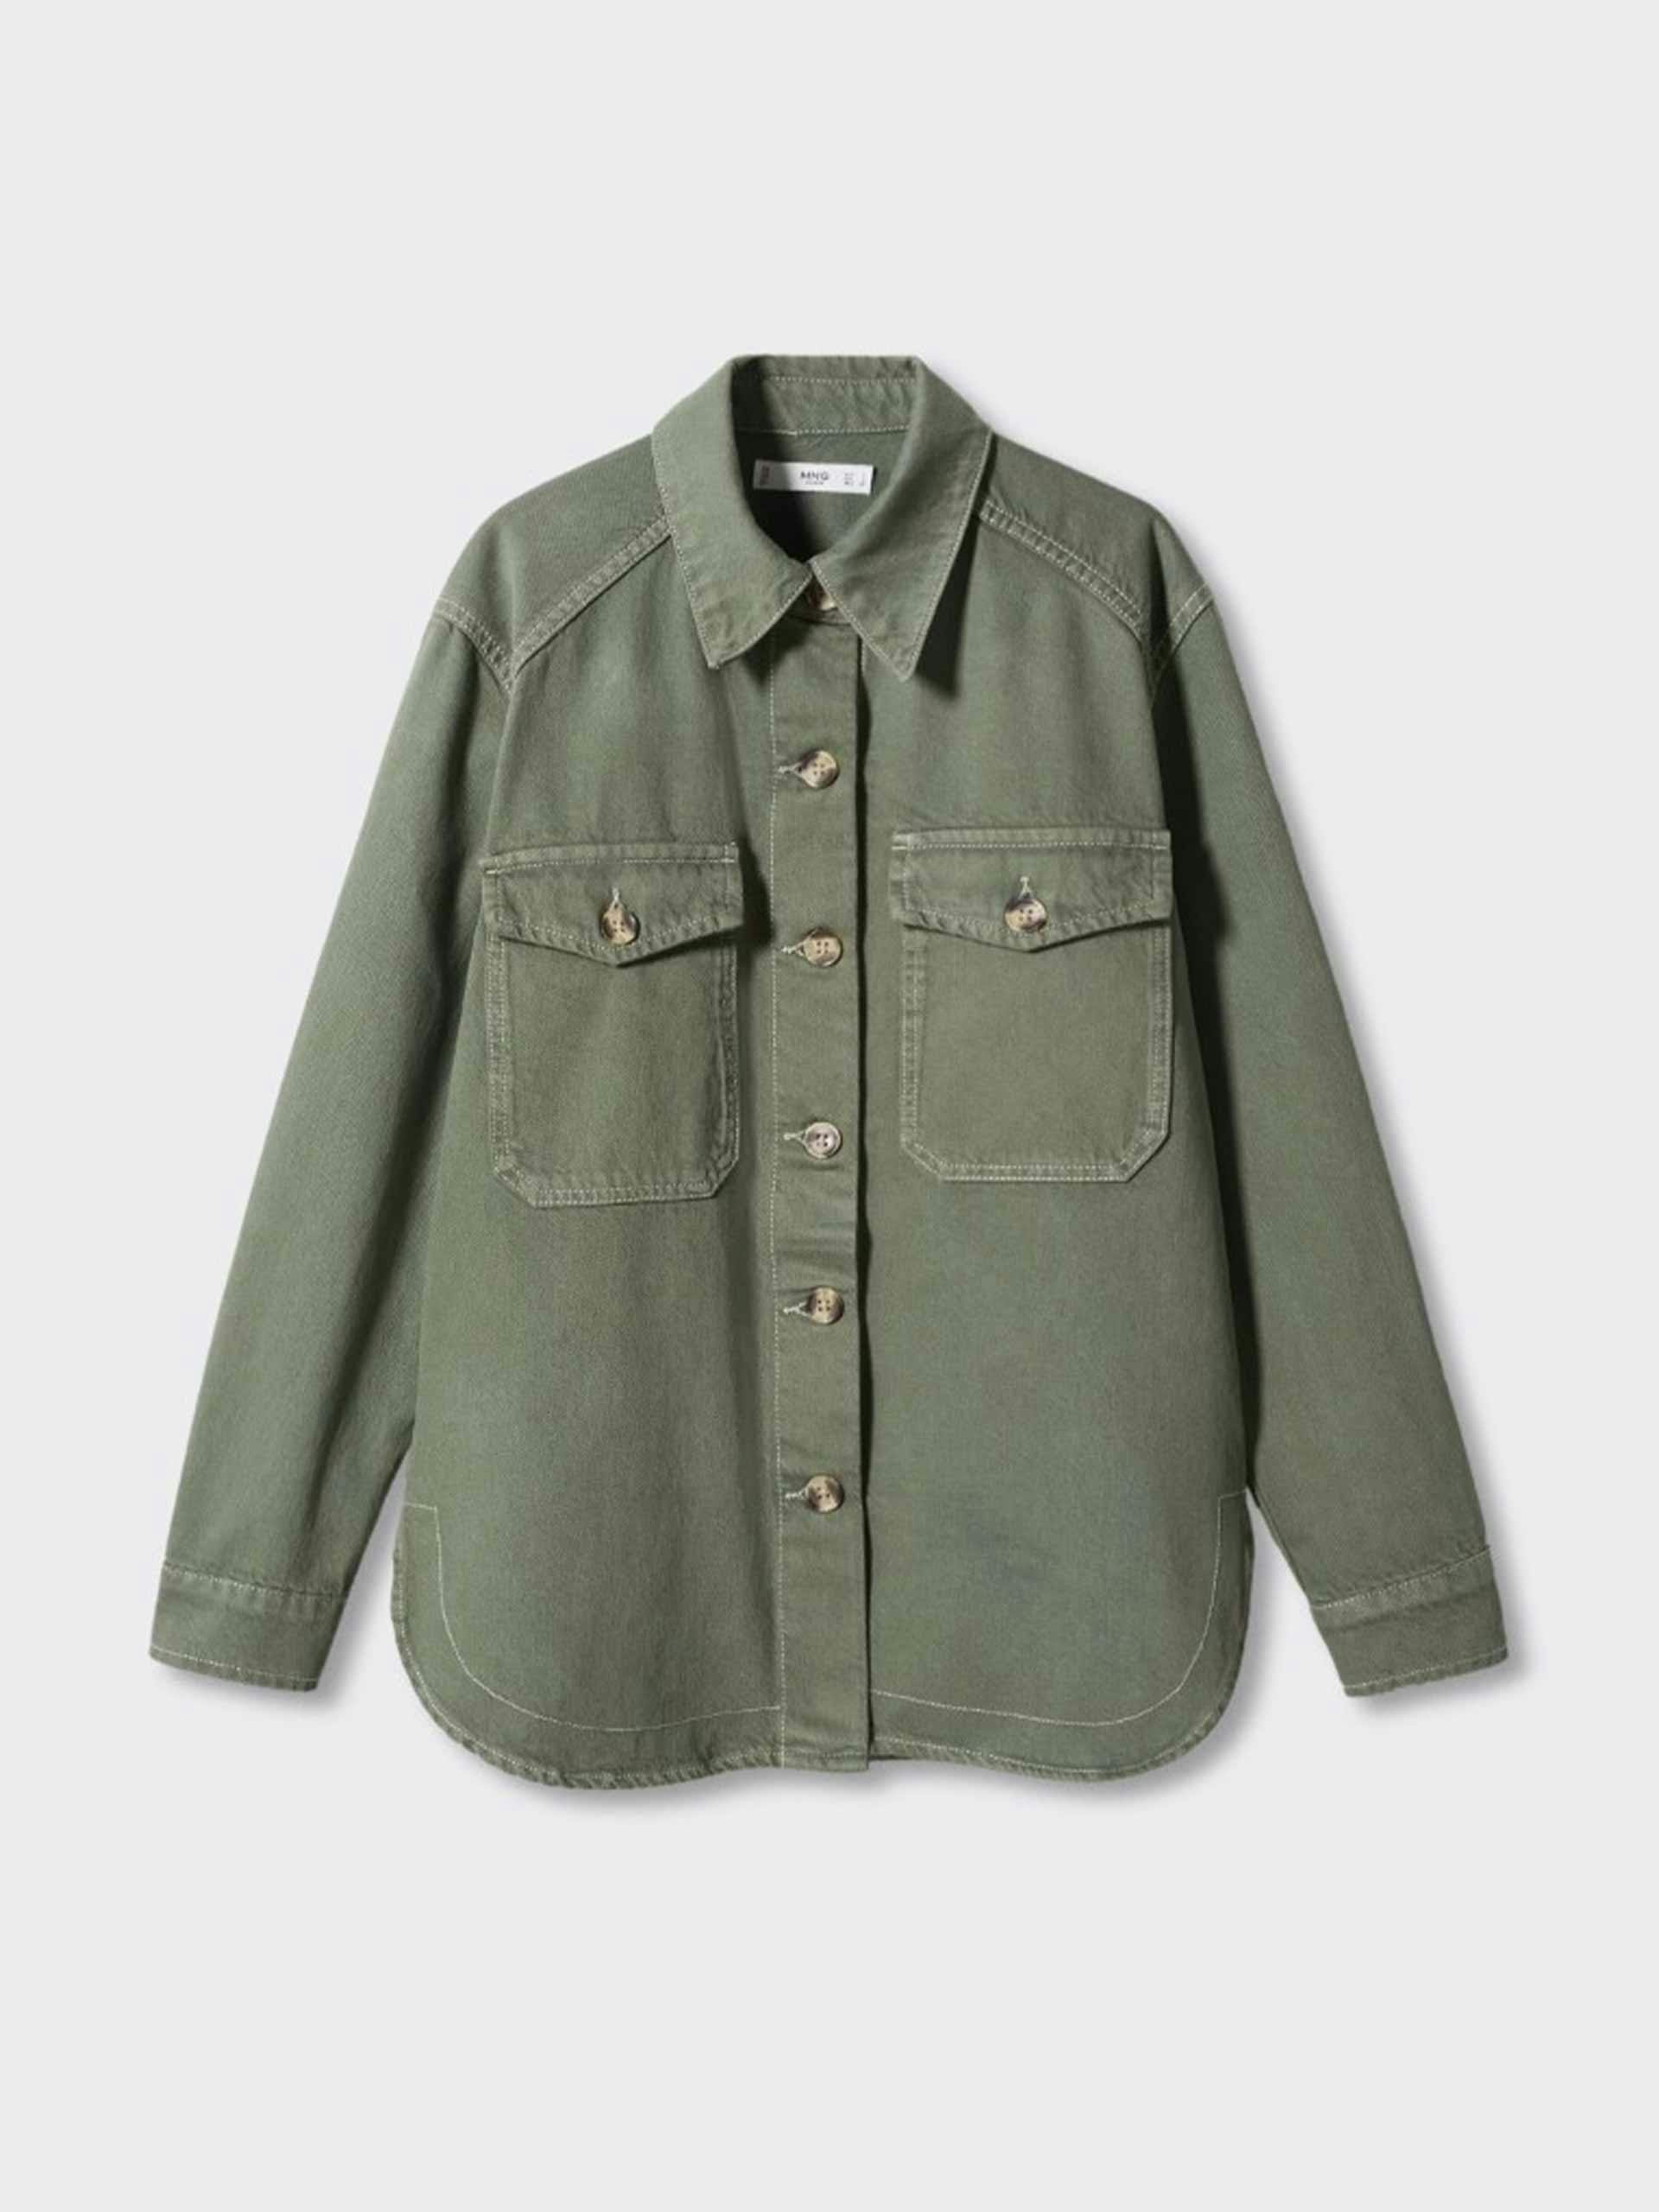 Green overshirt with pockets